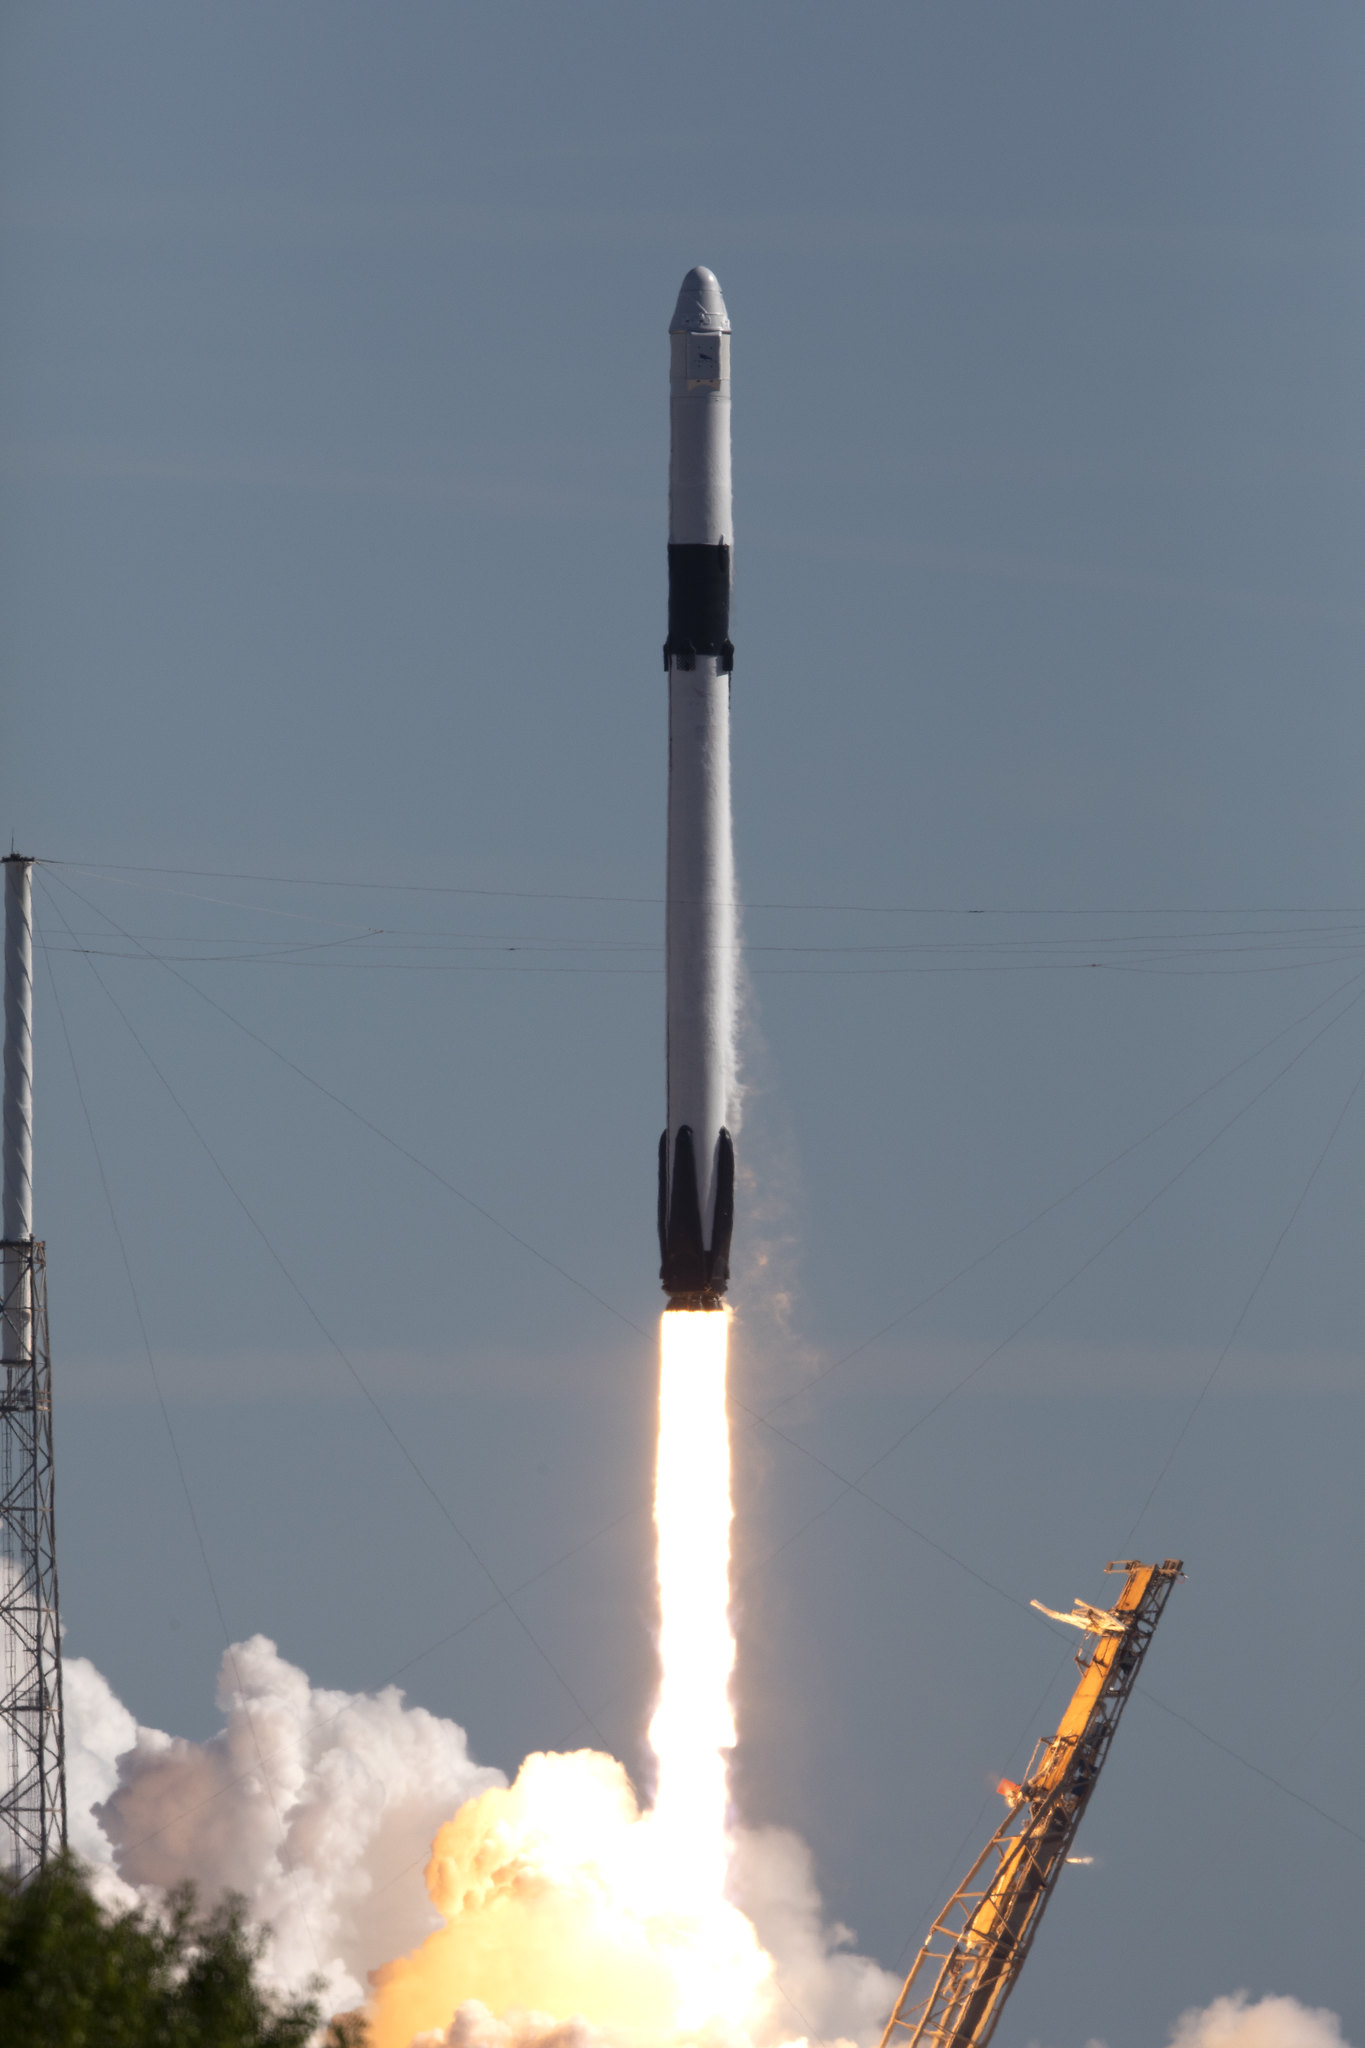 A two-stage SpaceX Falcon 9 launch vehicle lifts off from Space Launch Complex 40 at Cape Canaveral Air Force Station in Florida